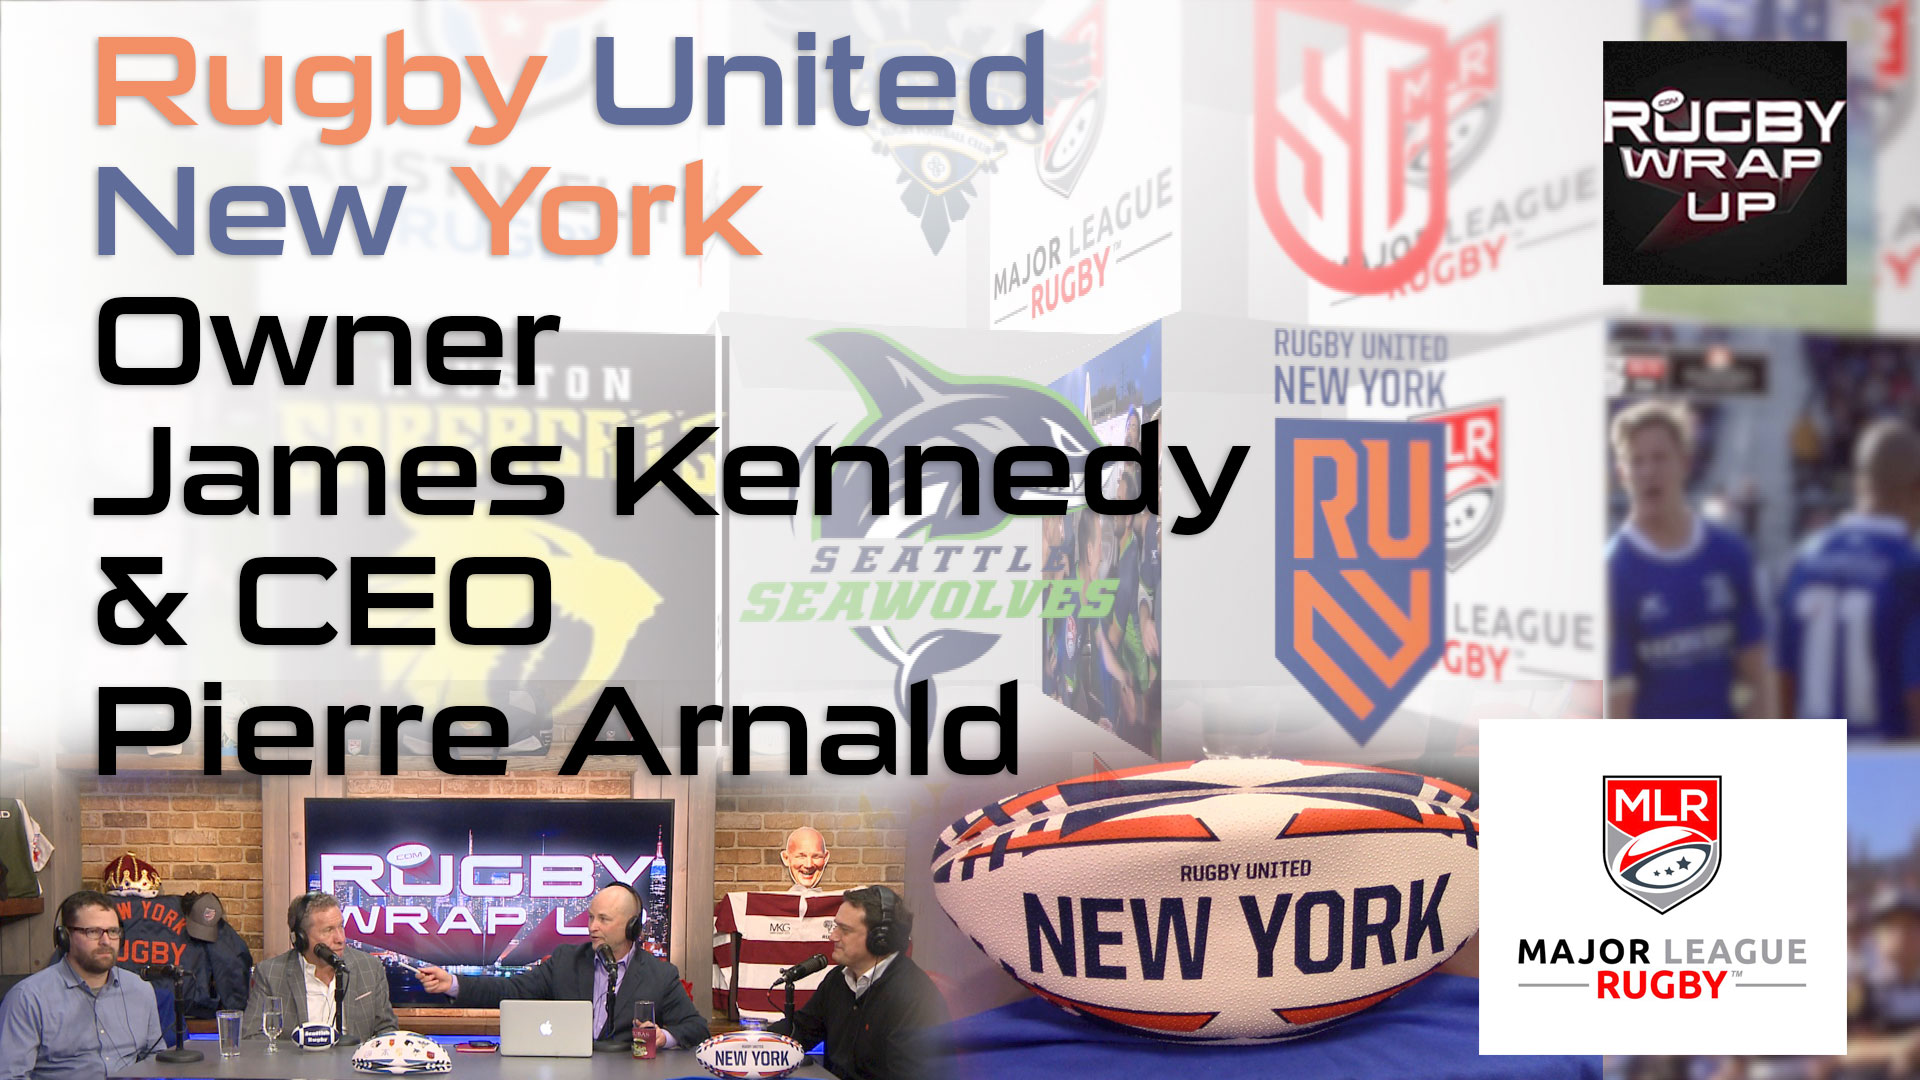 Rugby-United-New-York-Owner-James-Kennedy-&-CEO-Pierre-Arnald, Rugby_Wrap_Up